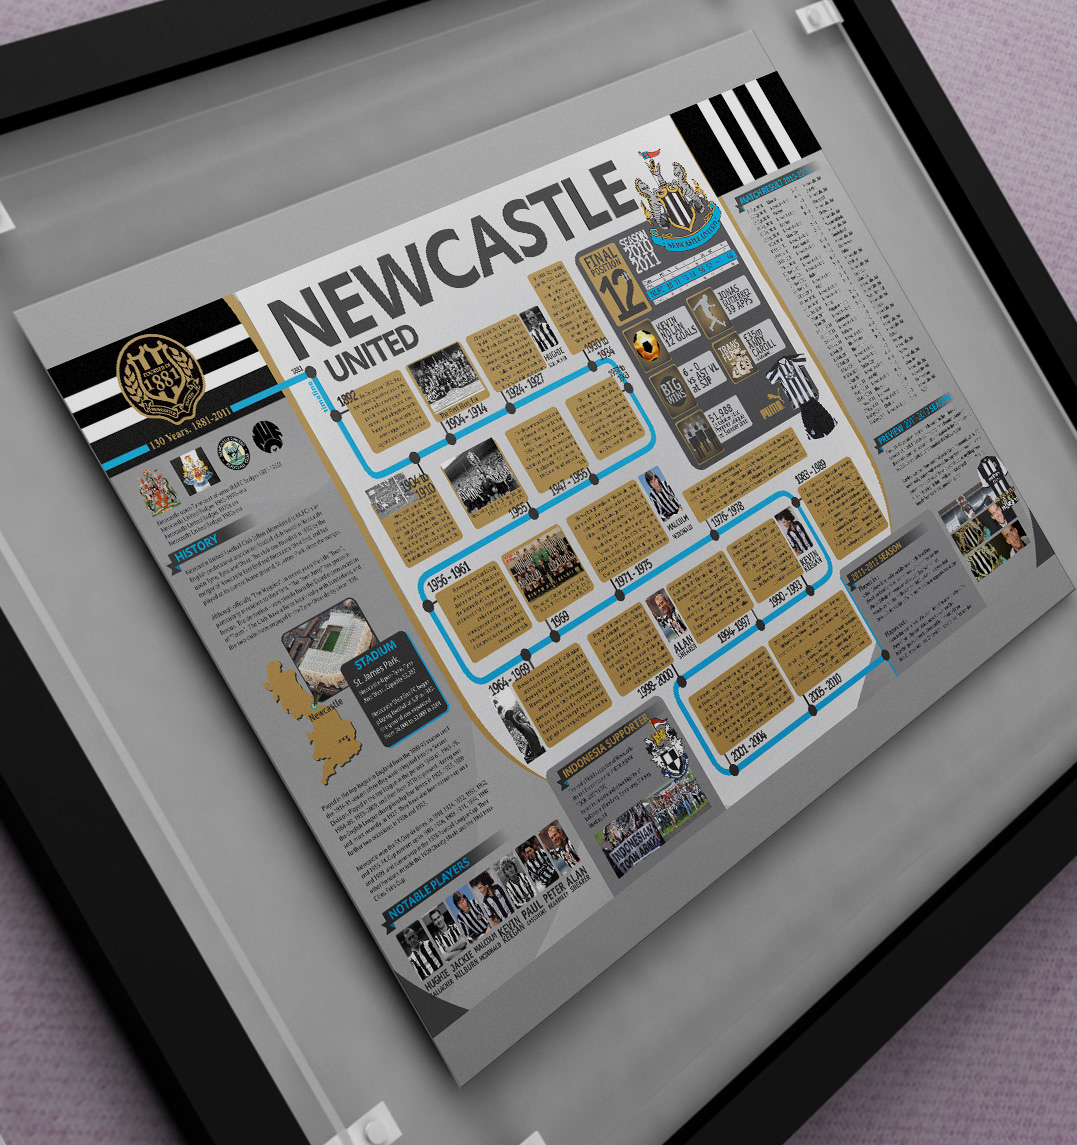 infographic Newcastle Newcastle United NUFC soccer football indonesia